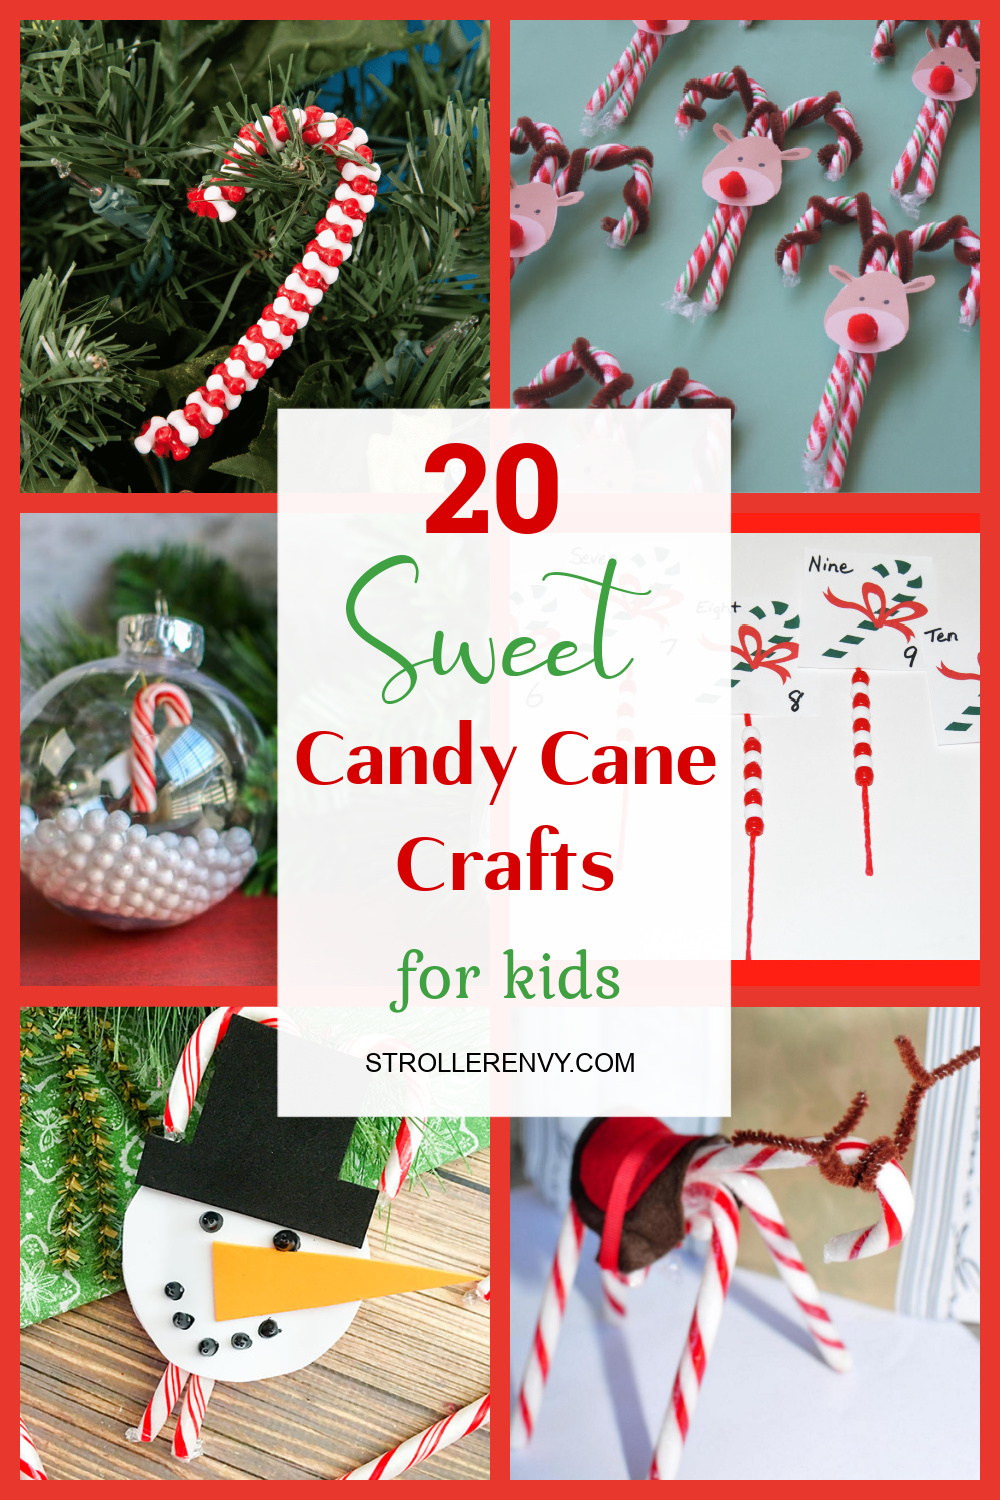 Candy Cane Crafts for Kids